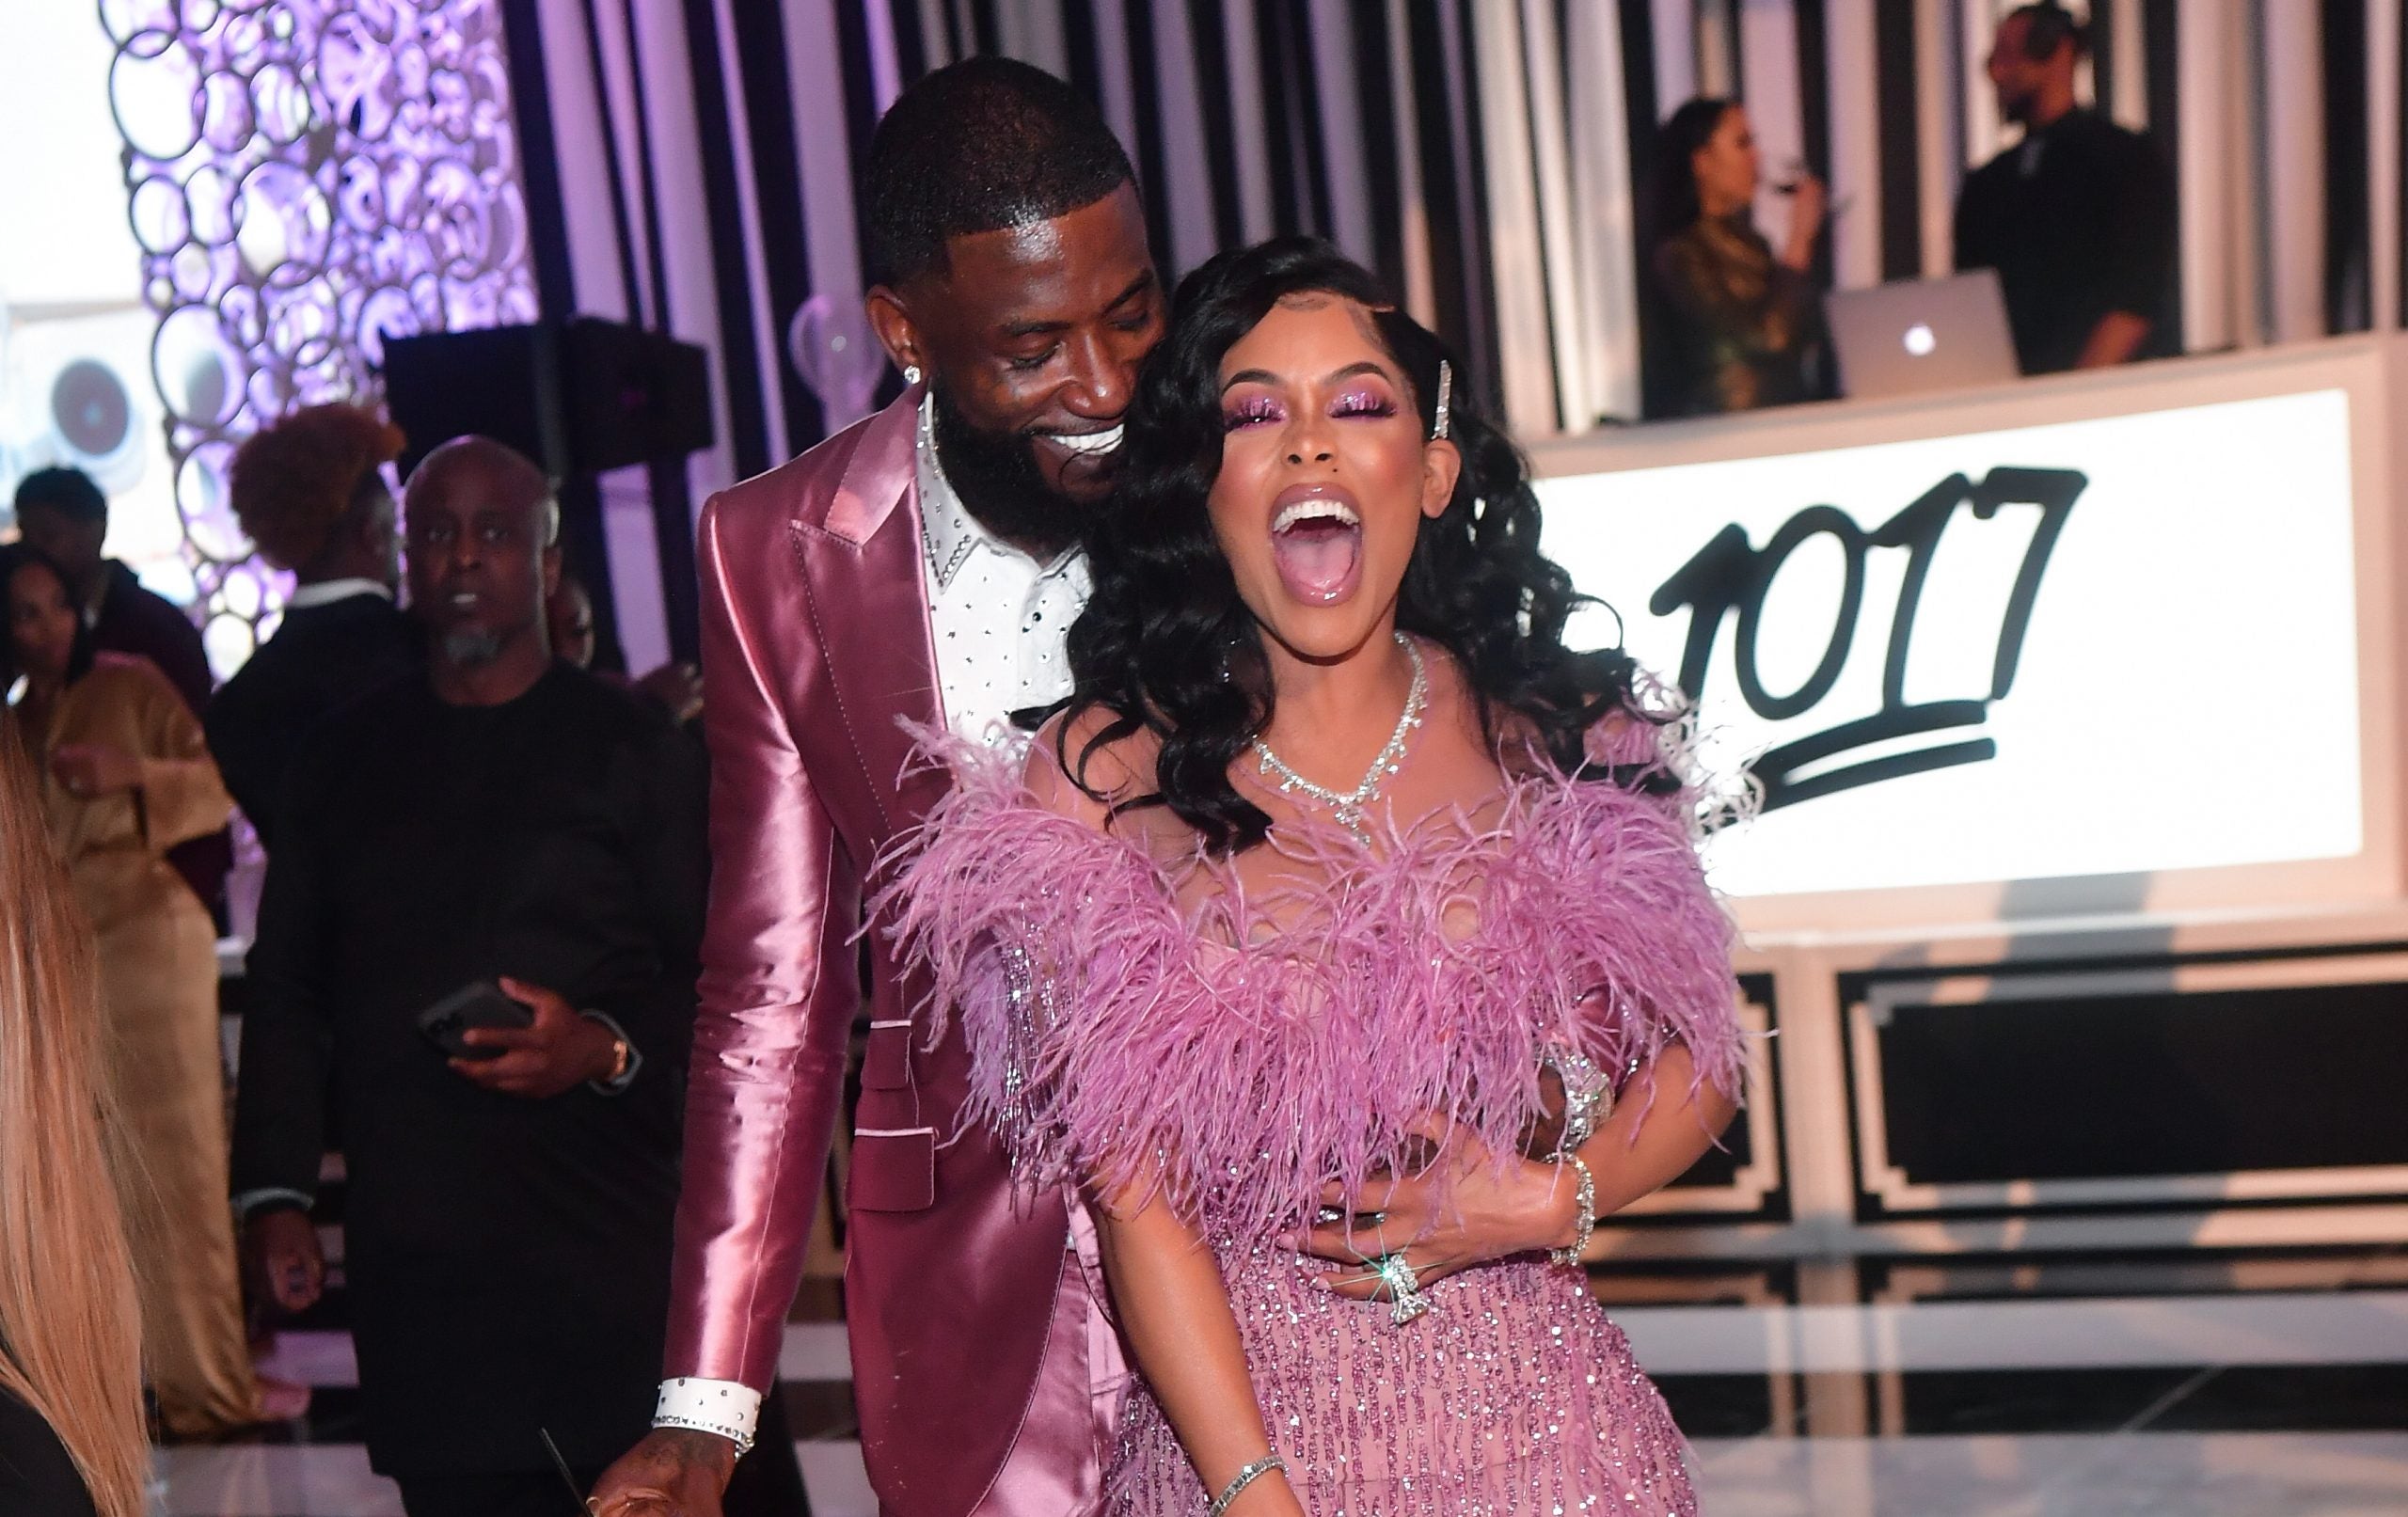 Gucci Mane and Keyshia Ka'oir Are Expecting Their First Child Together